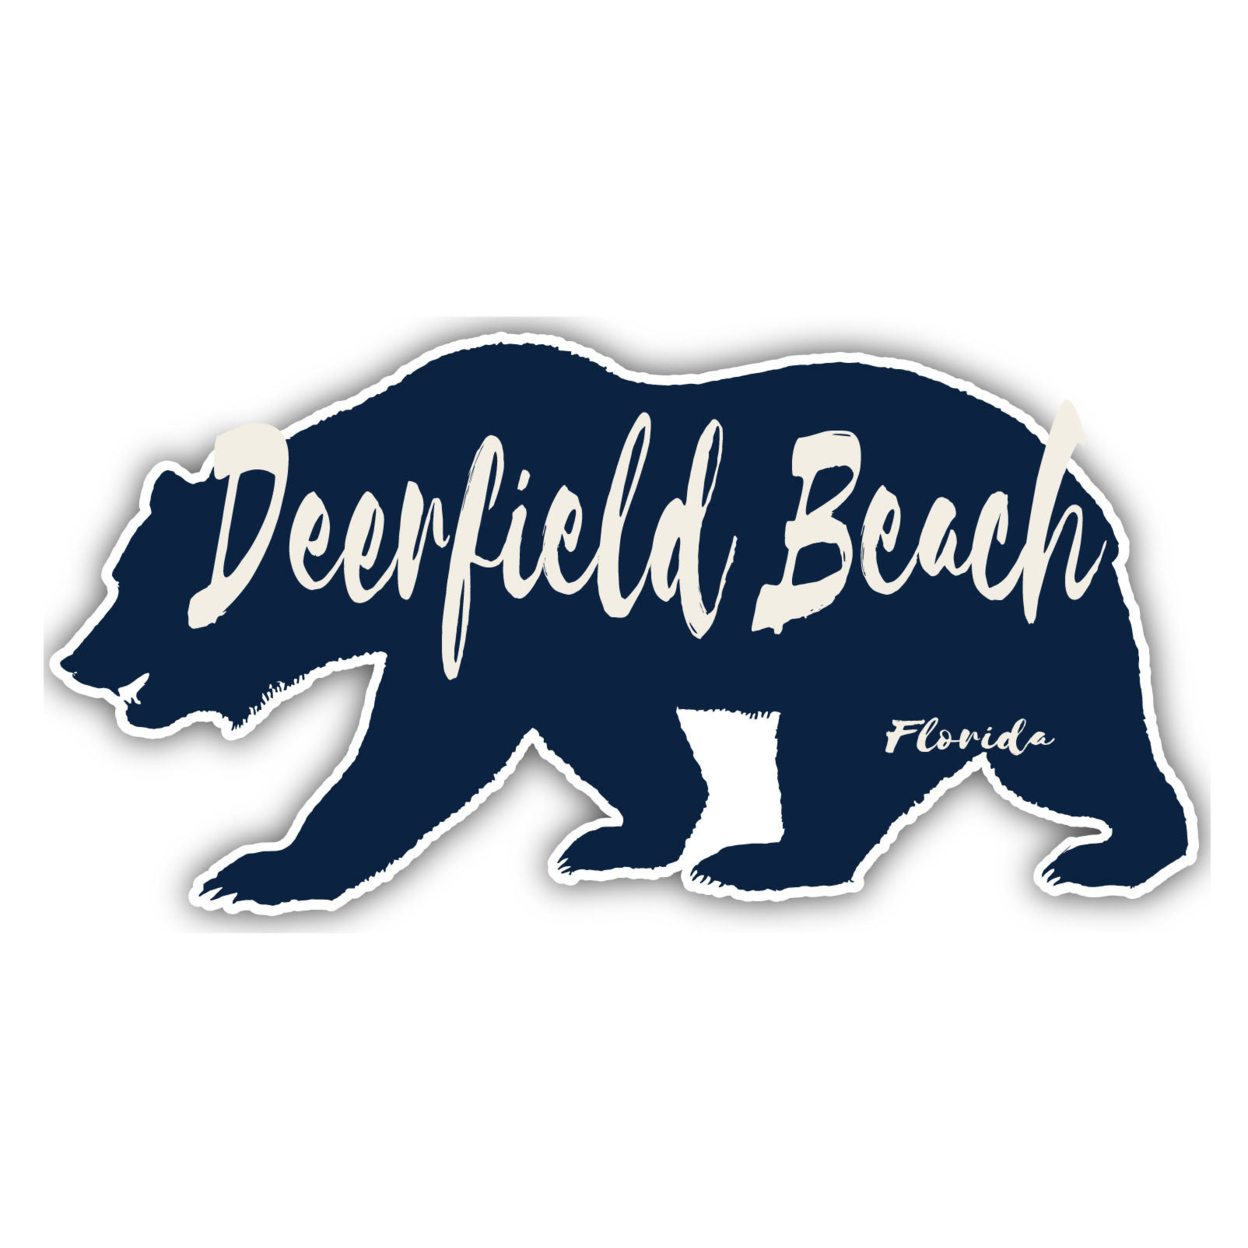 Deerfield Beach Florida Souvenir Decorative Stickers (Choose Theme And Size) - 4-Pack, 6-Inch, Great Outdoors